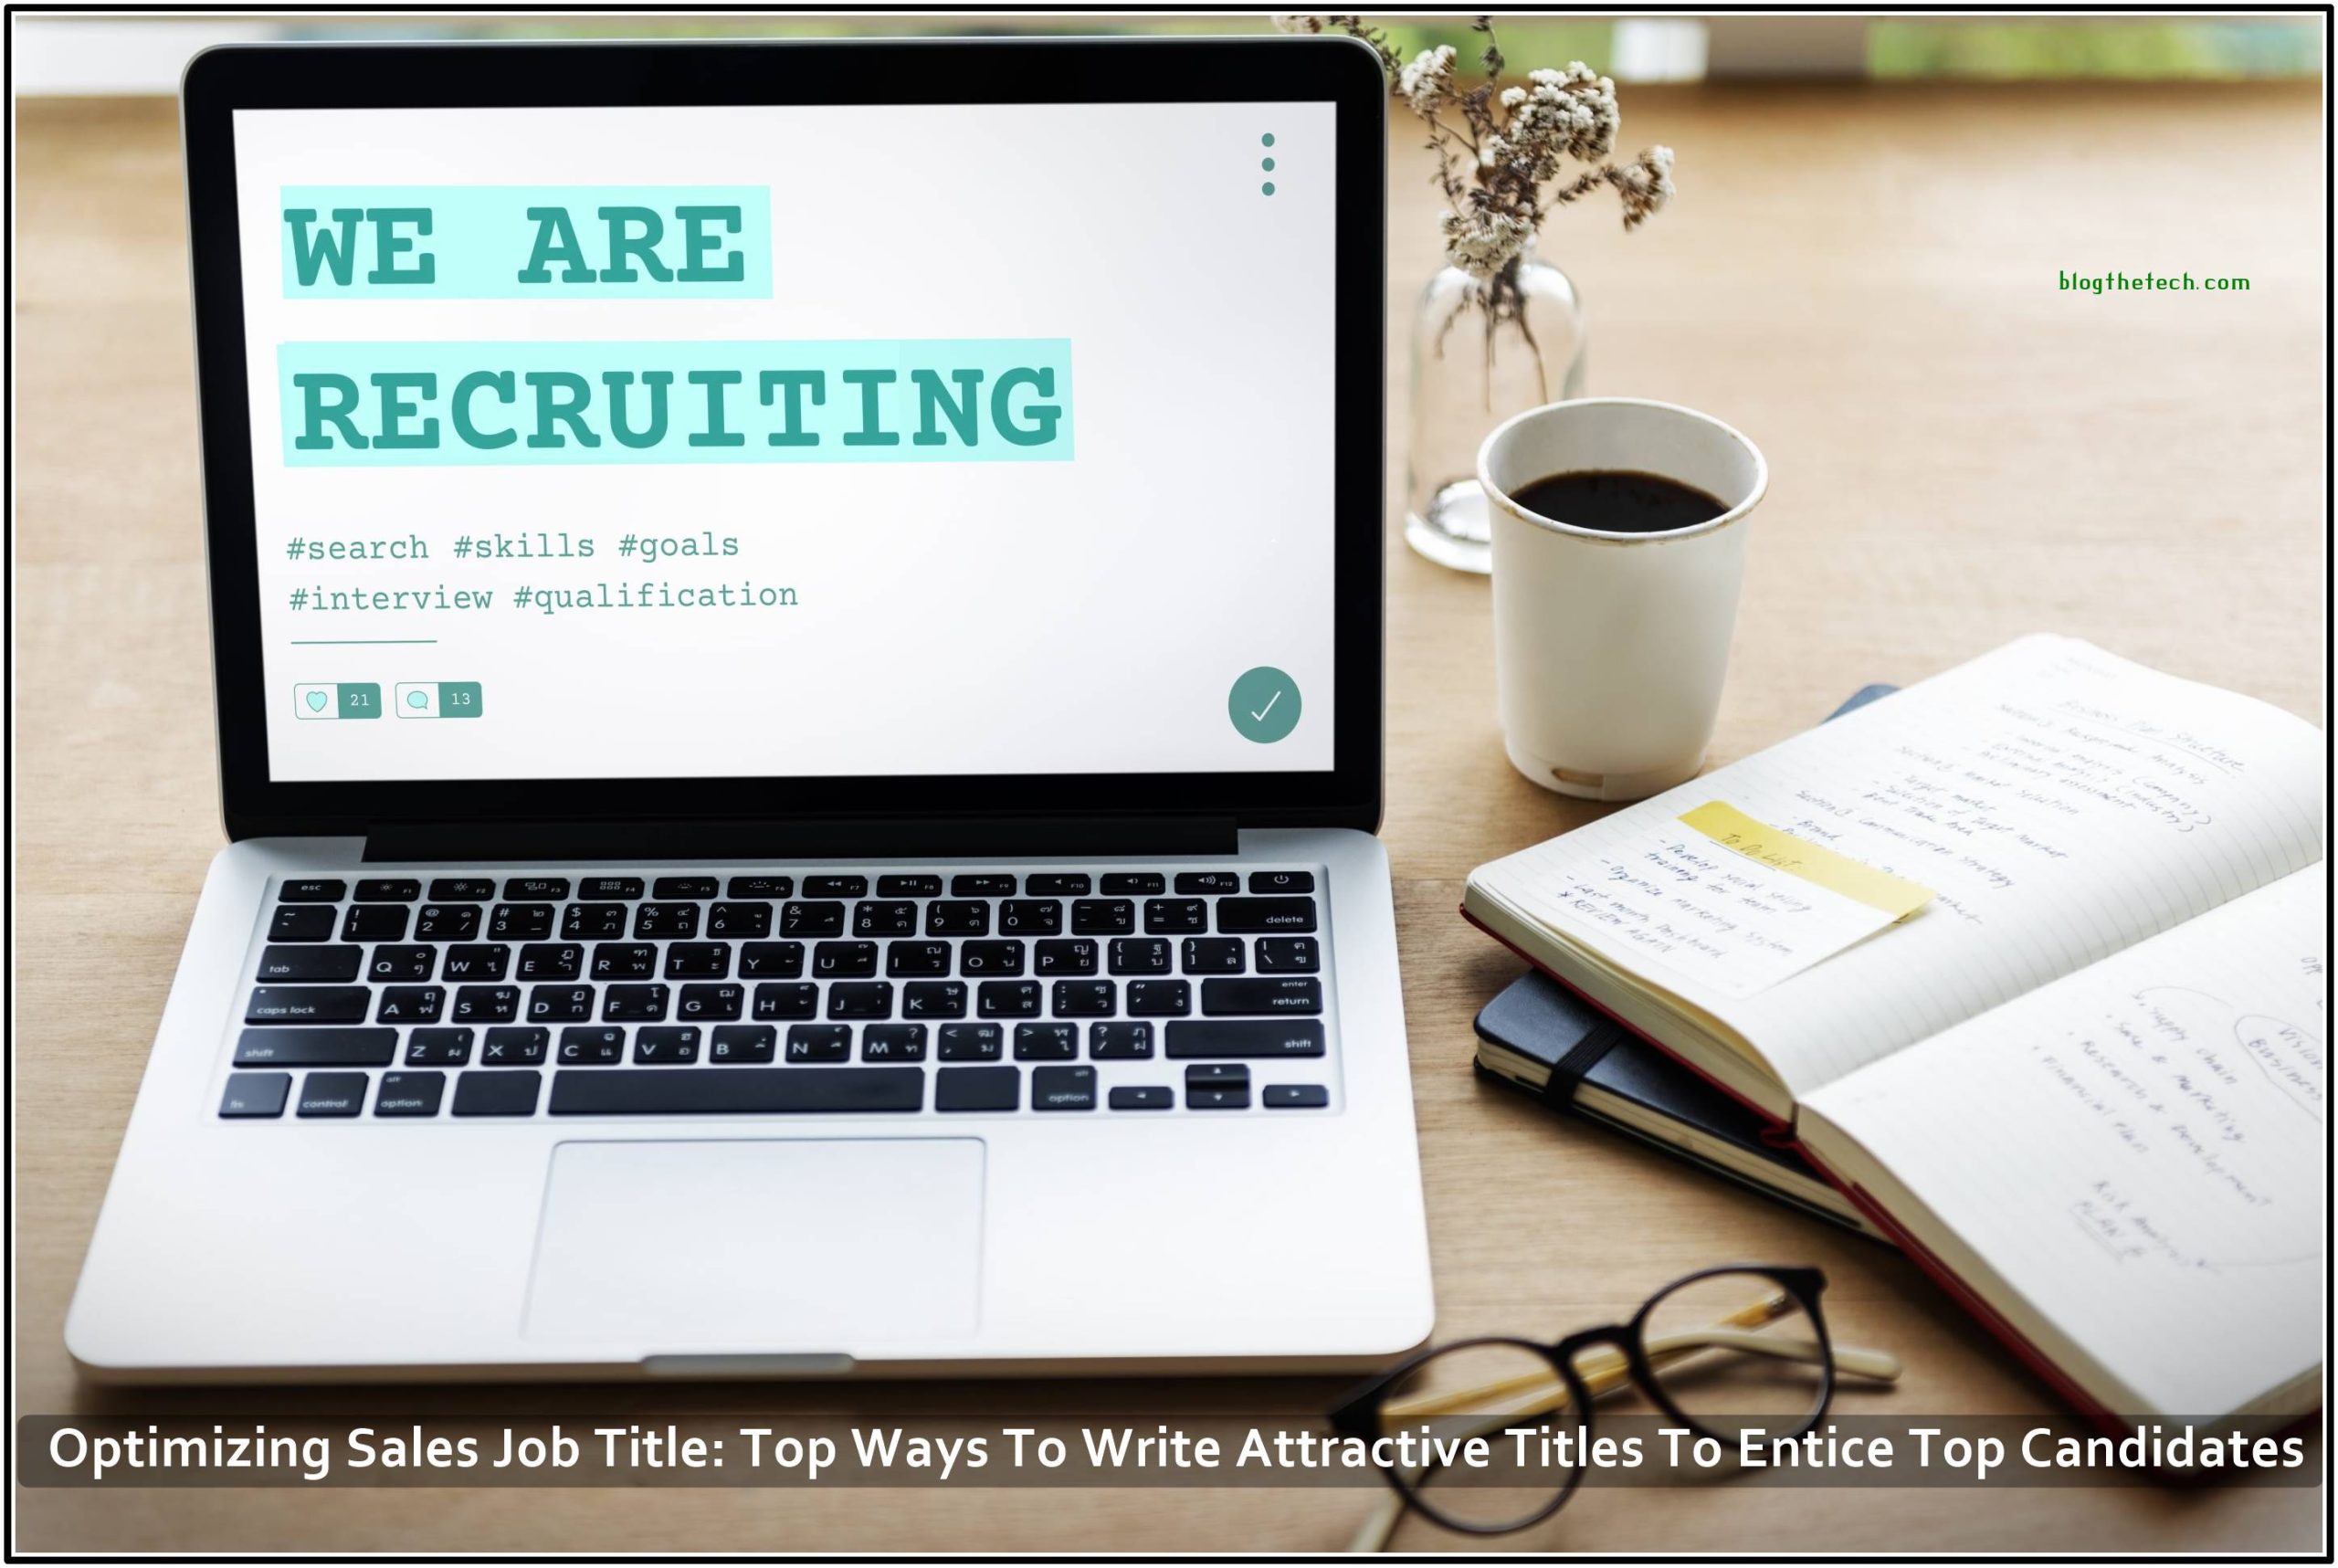 Optimizing Sales Job Title: Top Ways To Write Attractive Titles To Entice Top Candidates